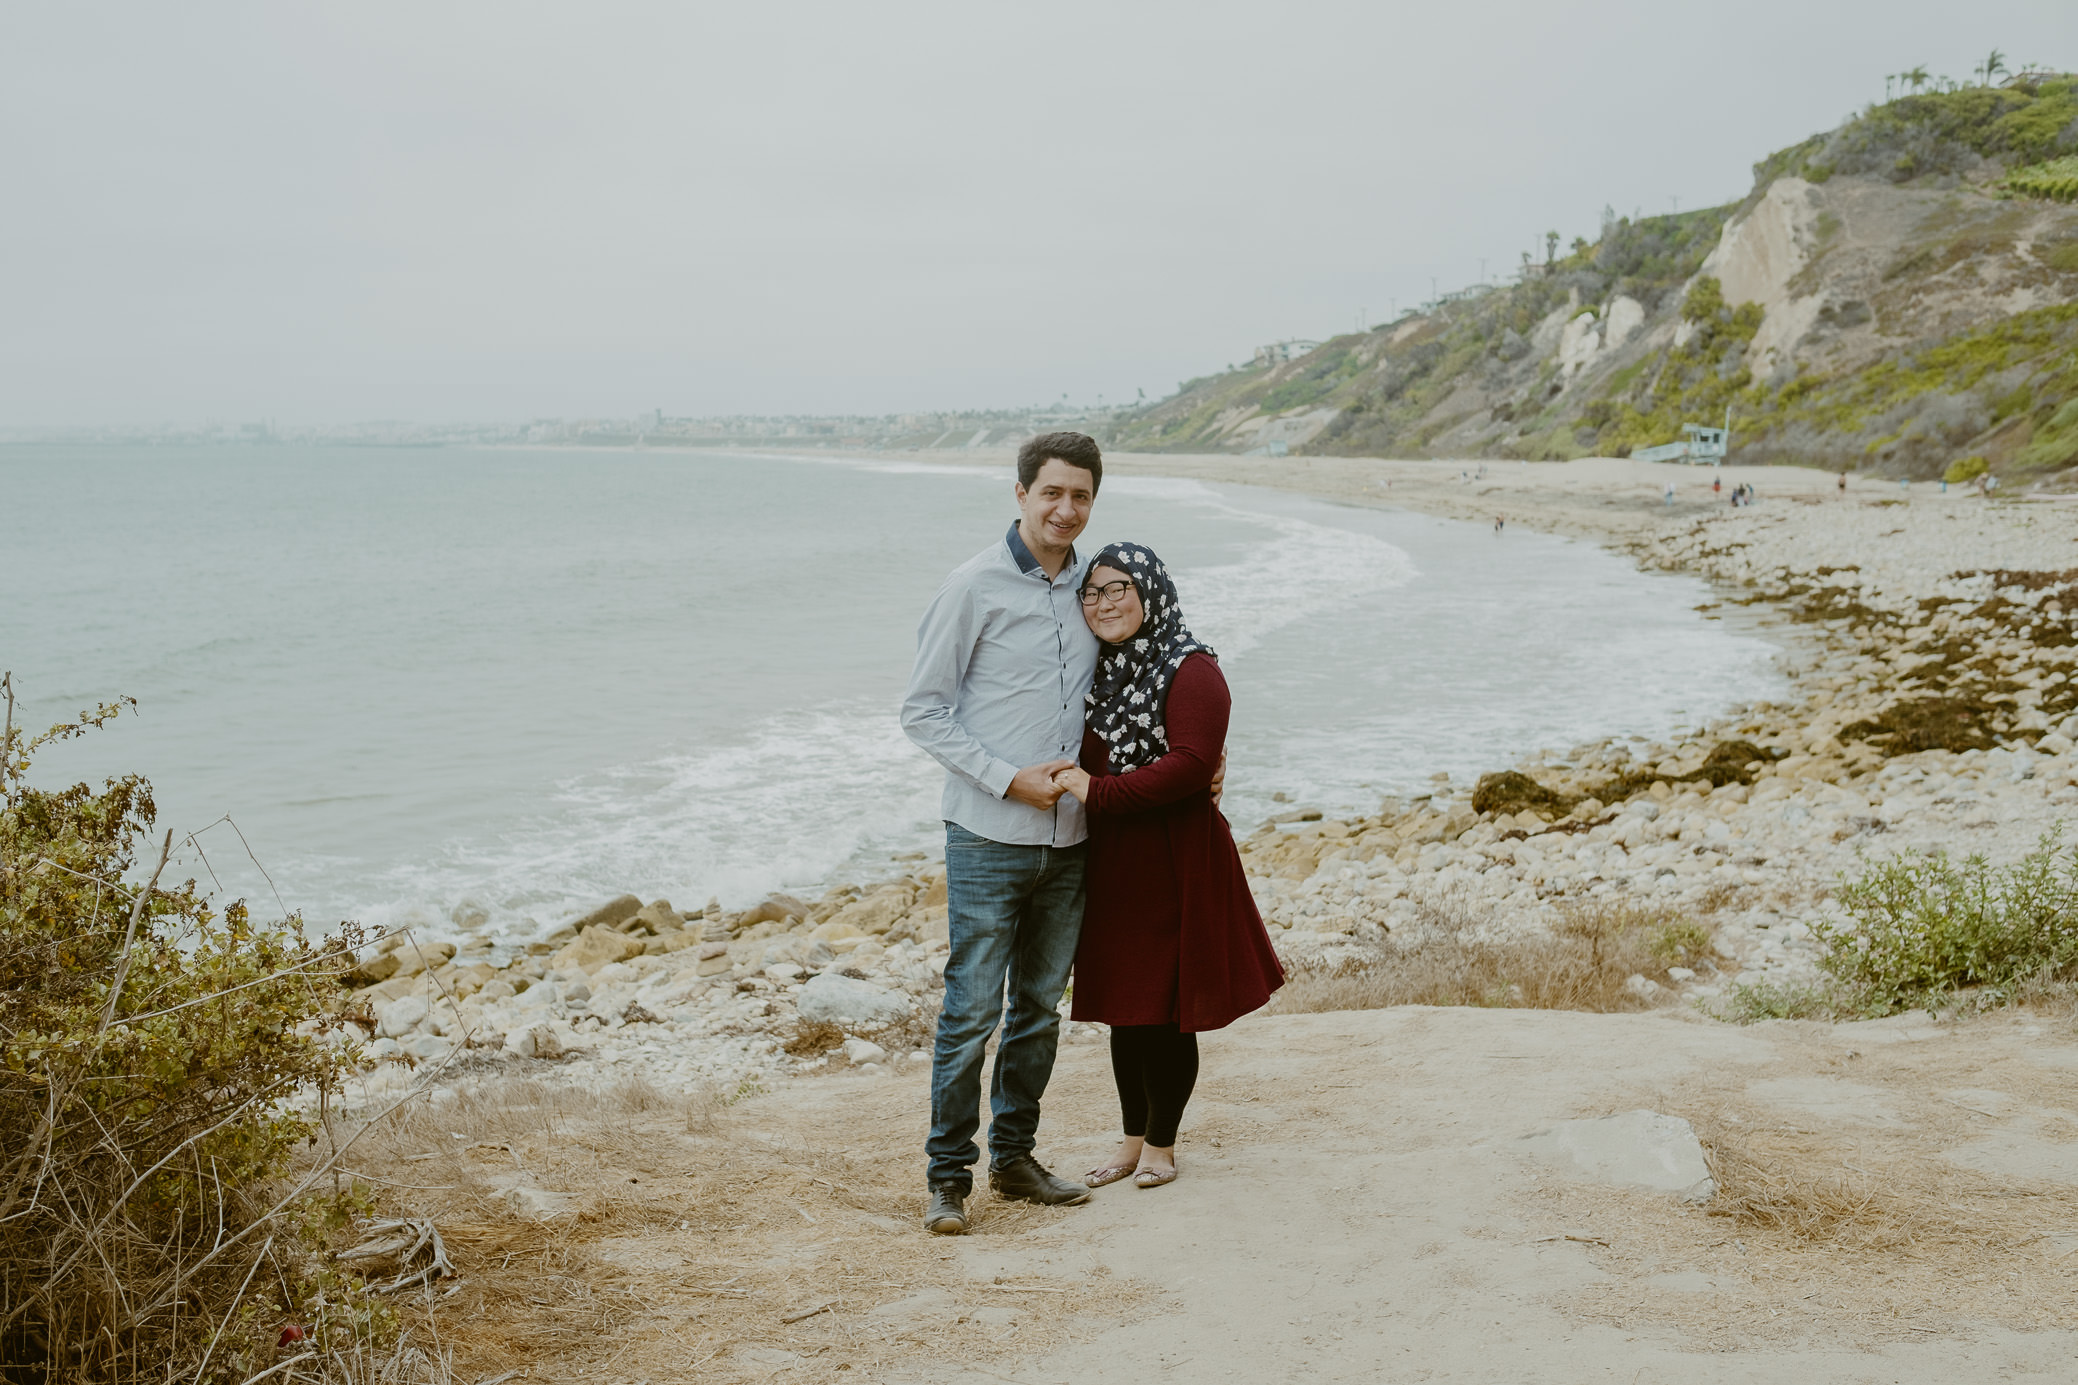 Palos Verdes Estates Bluff Cove Roessler Point Southern California Engagement Photography